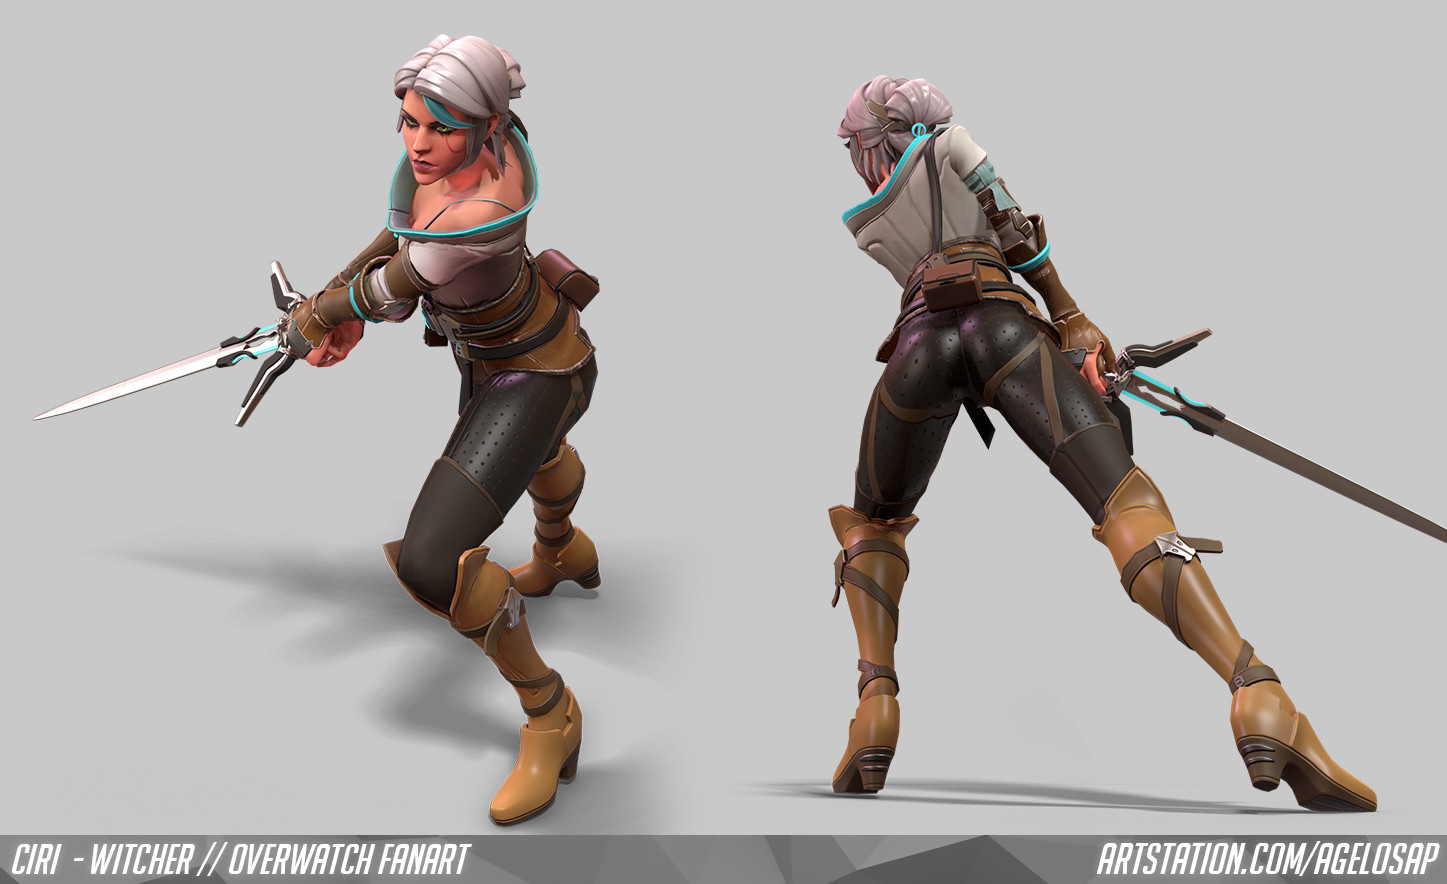 If The Witcher 3’s Ciri Was In Overwatch…